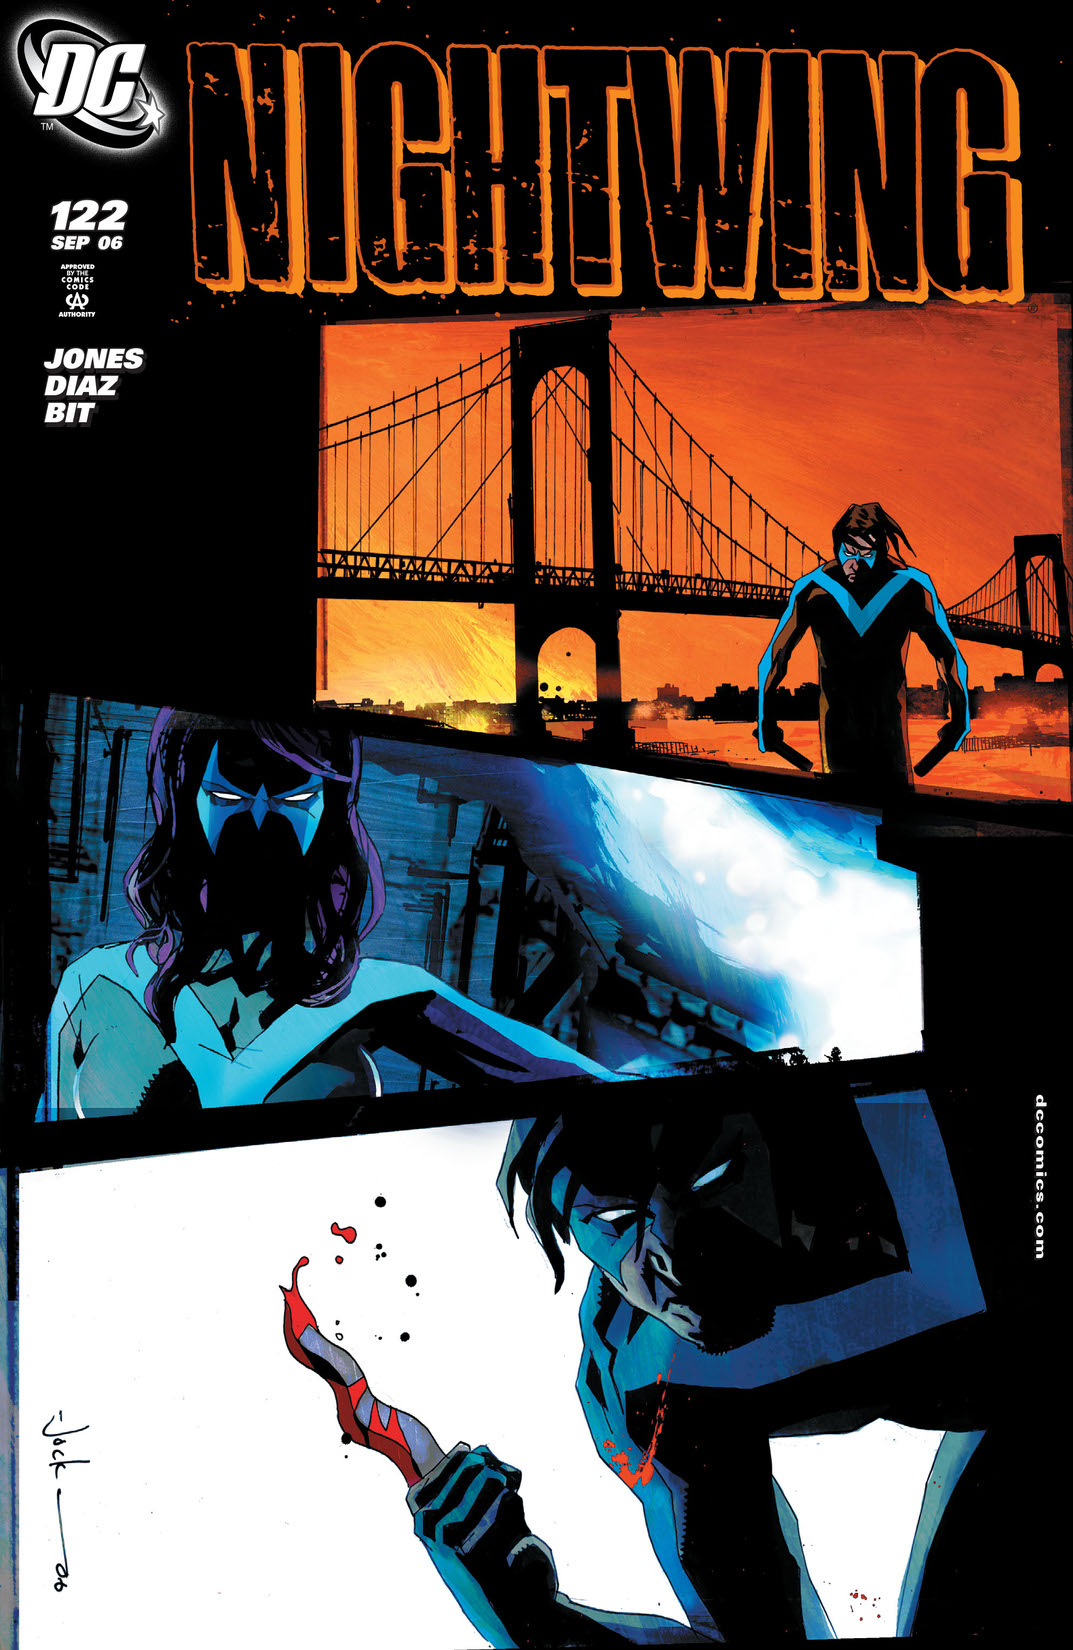 Nightwing (1996-) #122 preview images